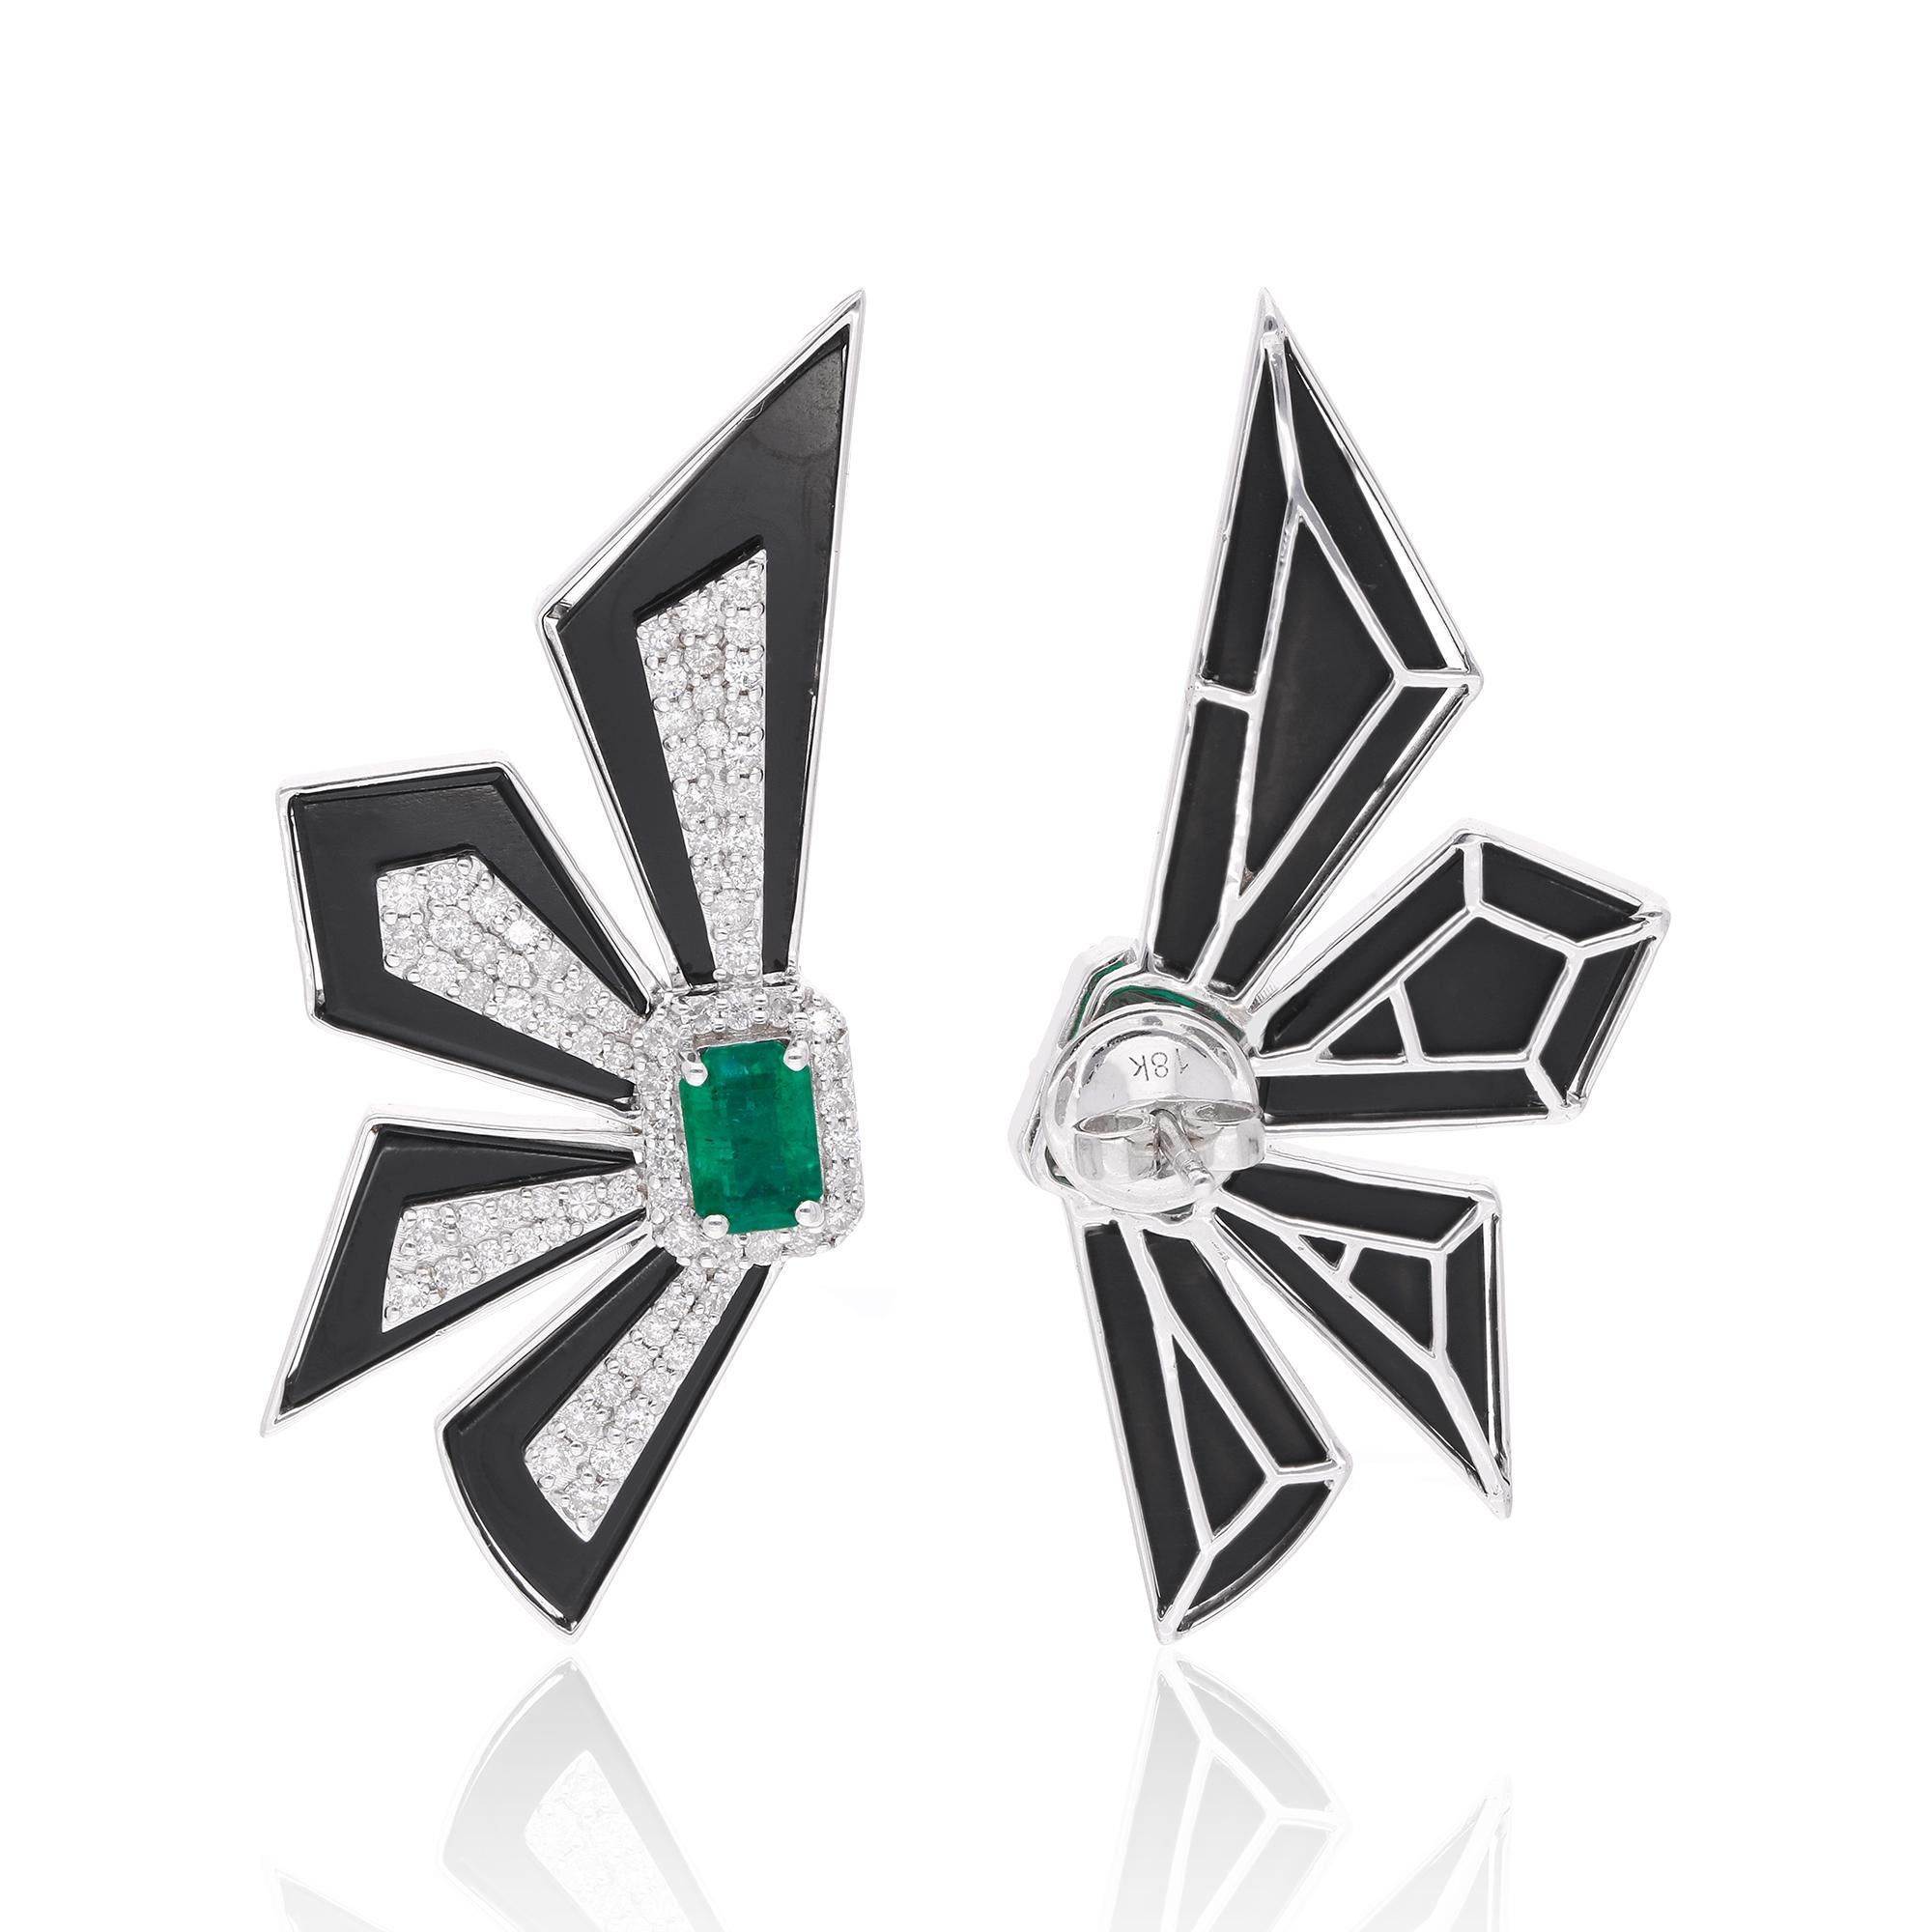 These Dainty Diamond Stud Earrings with 1.14 ct. Genuine Diamonds & 1.27 ct. Zambian Emerald are a promise of perfection and purity. These earrings are set in 14k Solid White Gold. You can choose these earrings in 10k/14k/18k Rose Gold/Yellow